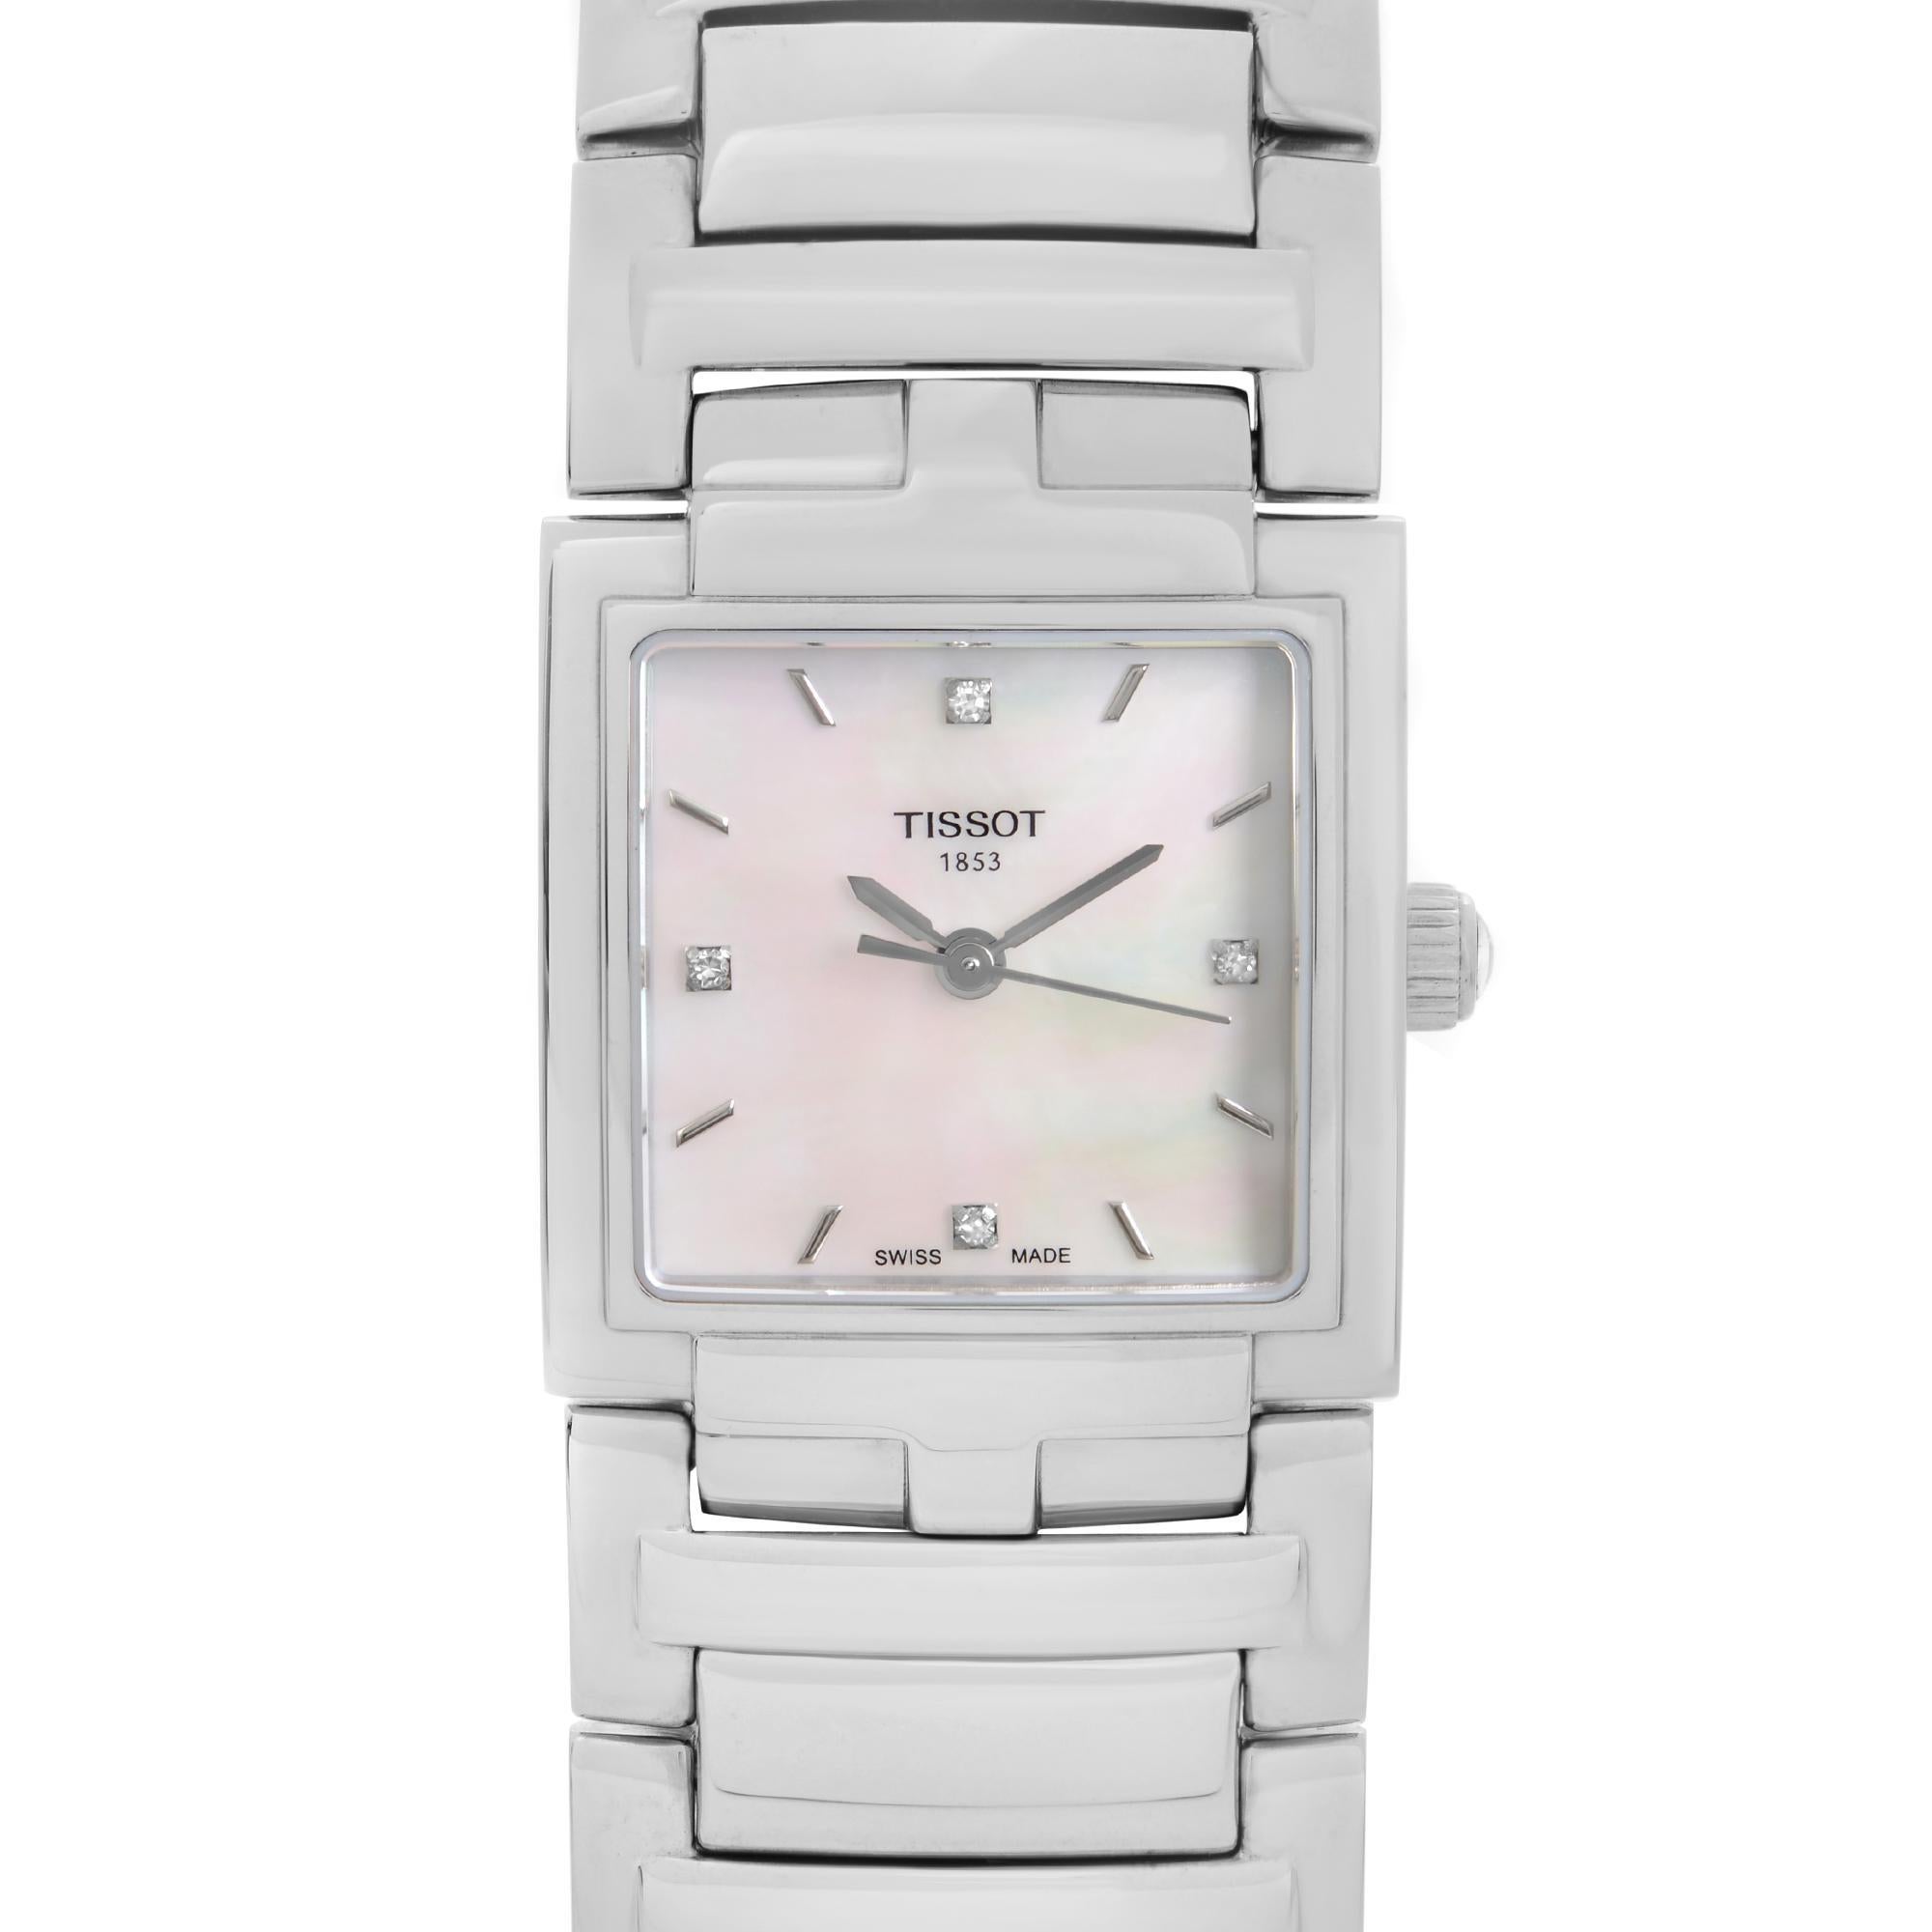 Display Model Tissot T-Evocation Steel MOP Diamond Dial Ladies Quartz Watch T051.310.11.116.00. This Beautiful Timepiece is Powered by a Quartz (Battery) Movement and Features: Stainless Steel Case and Bracelet, Mother of Pearl Dial with Silver-Tone